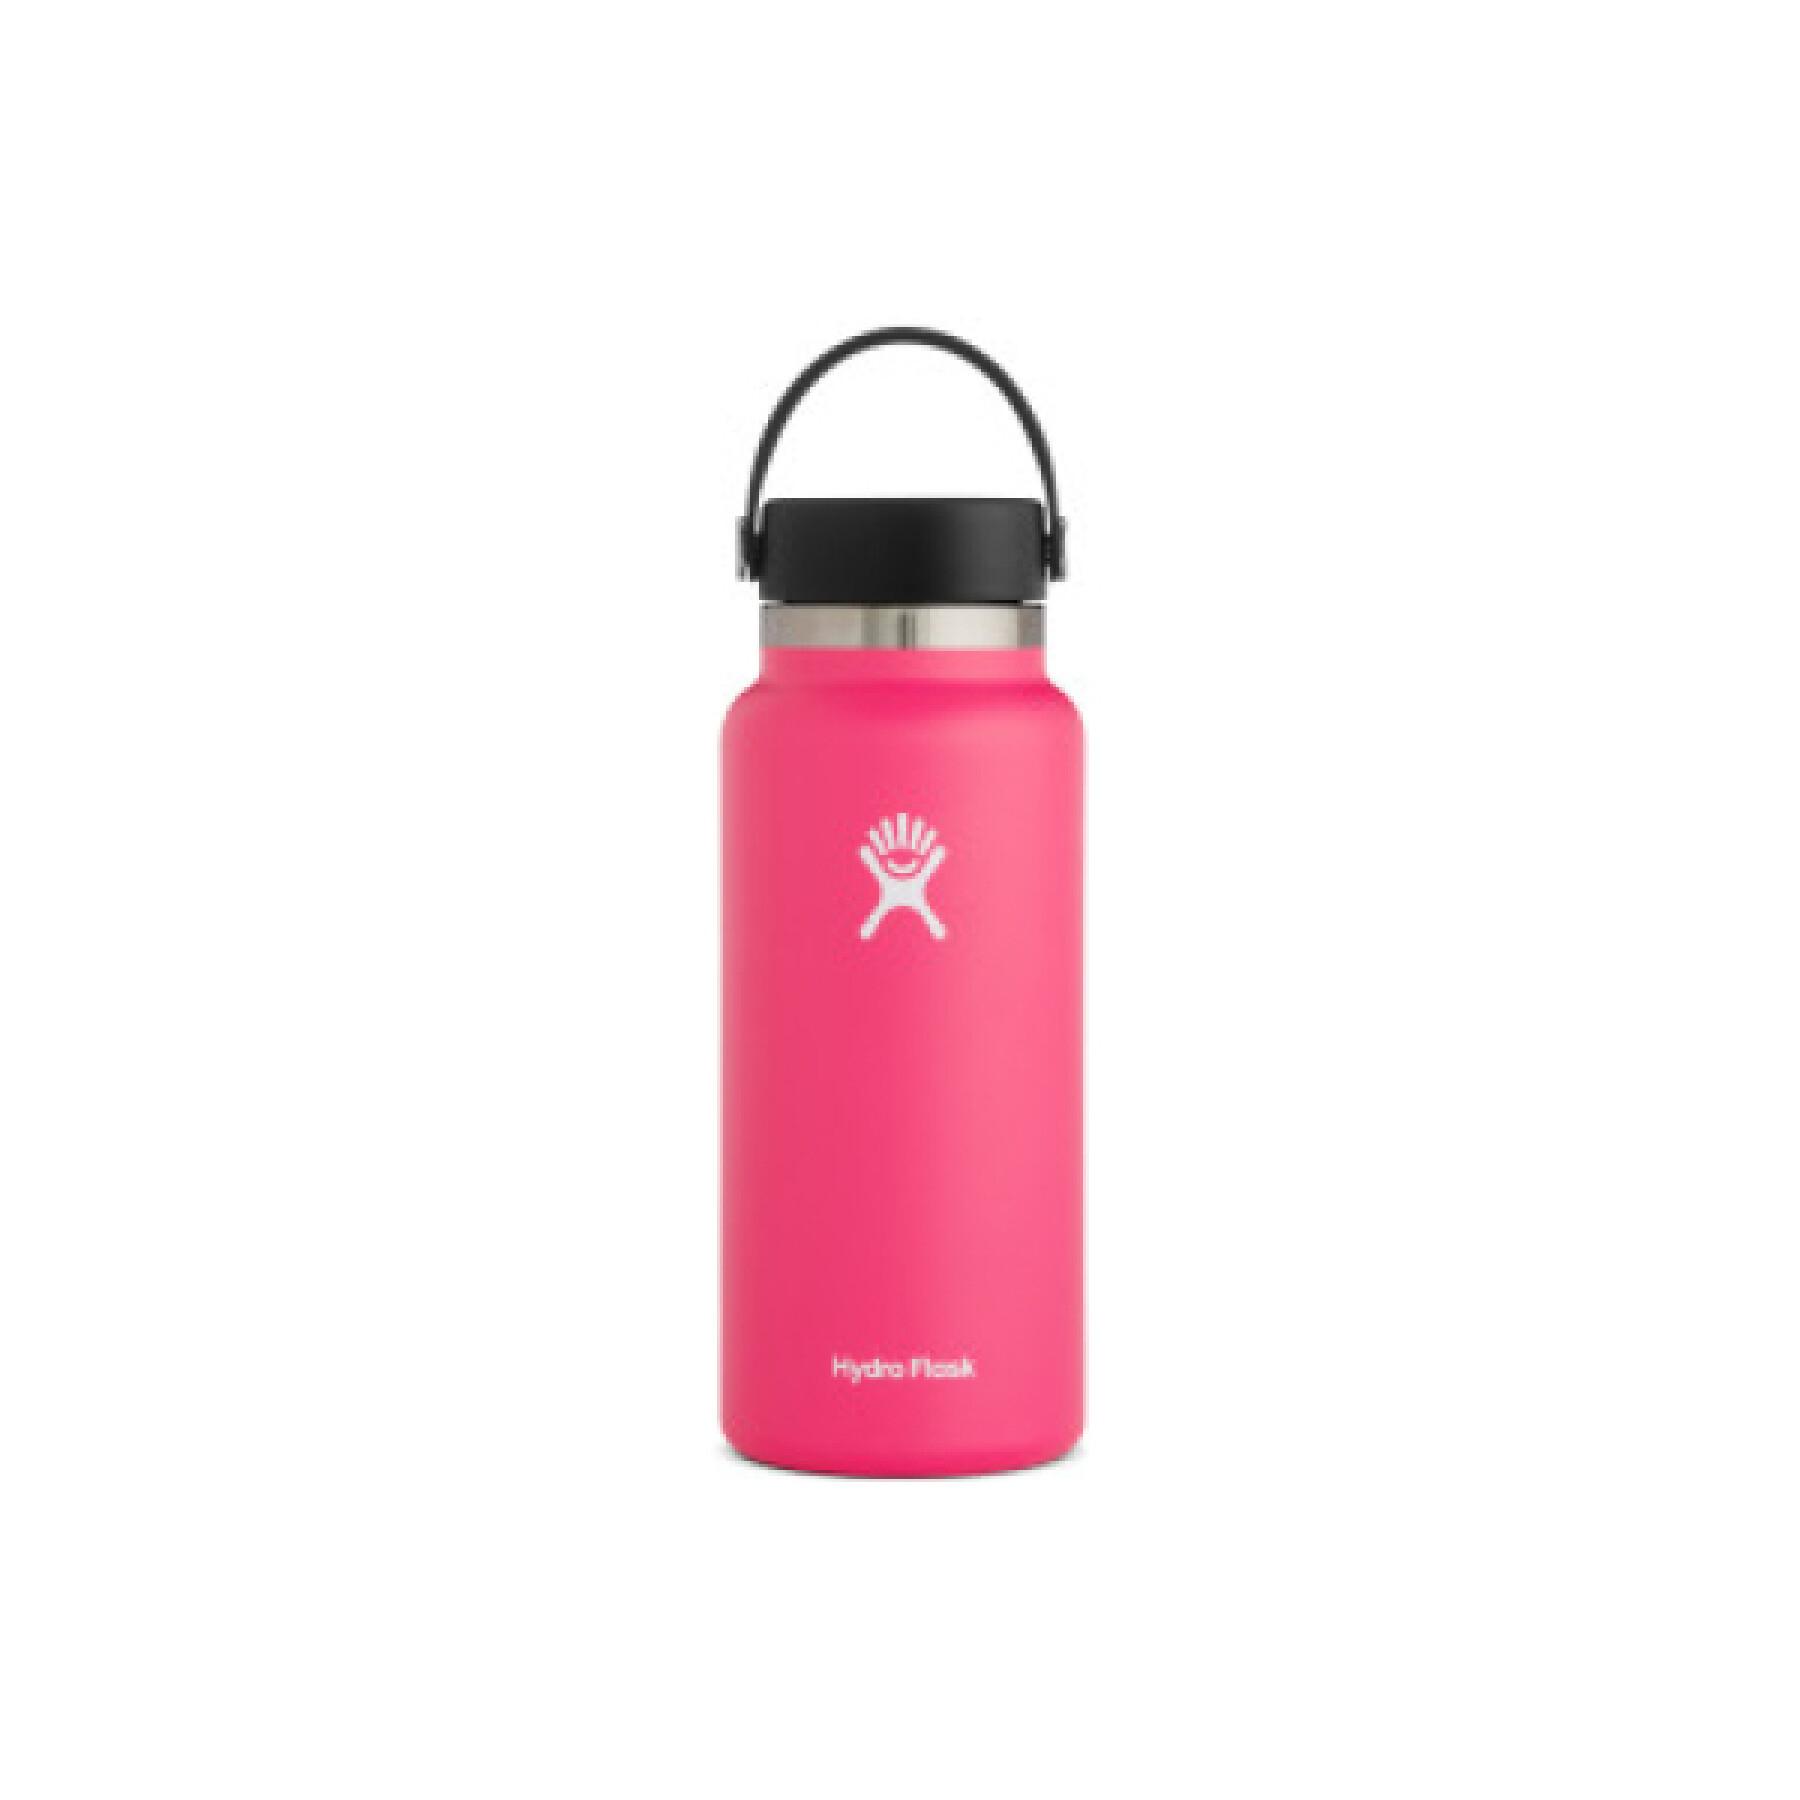 Termos Hydro Flask wide mouth with flex cap 32 oz